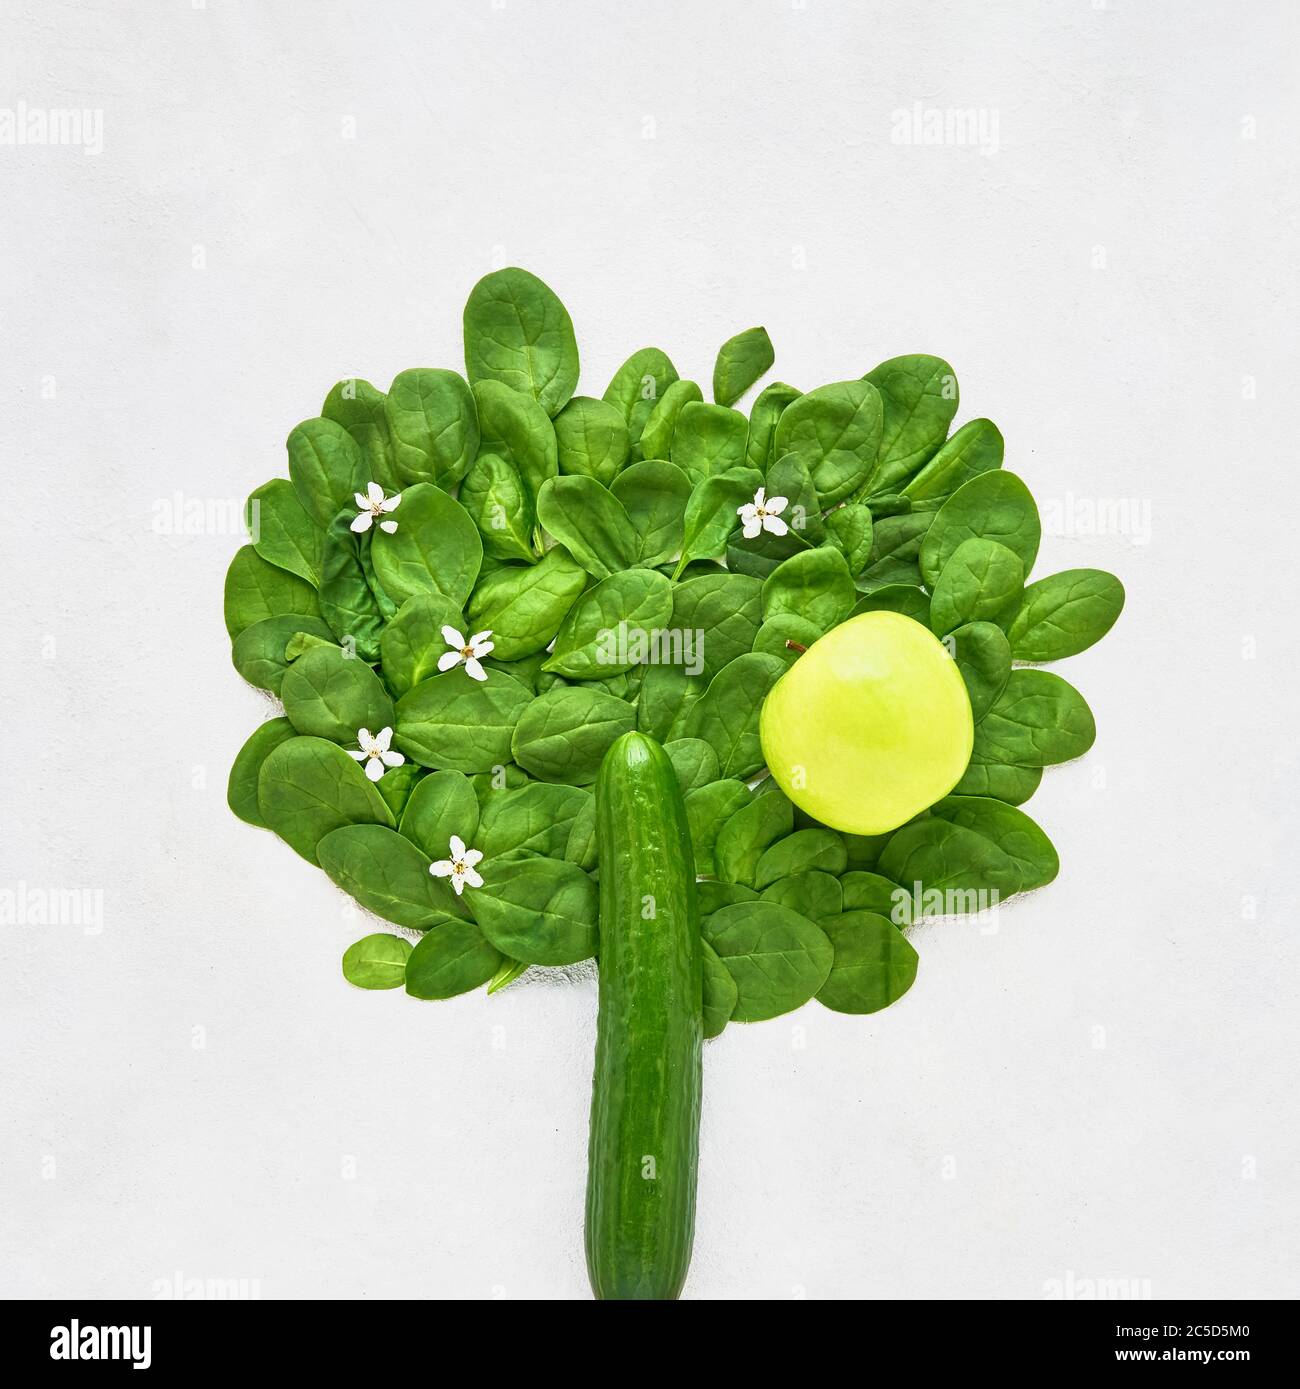 Abstract tree made from cucumber and green spinach. Healthy food, dietary and weight loss concept. Top view, copy space for text Stock Photo